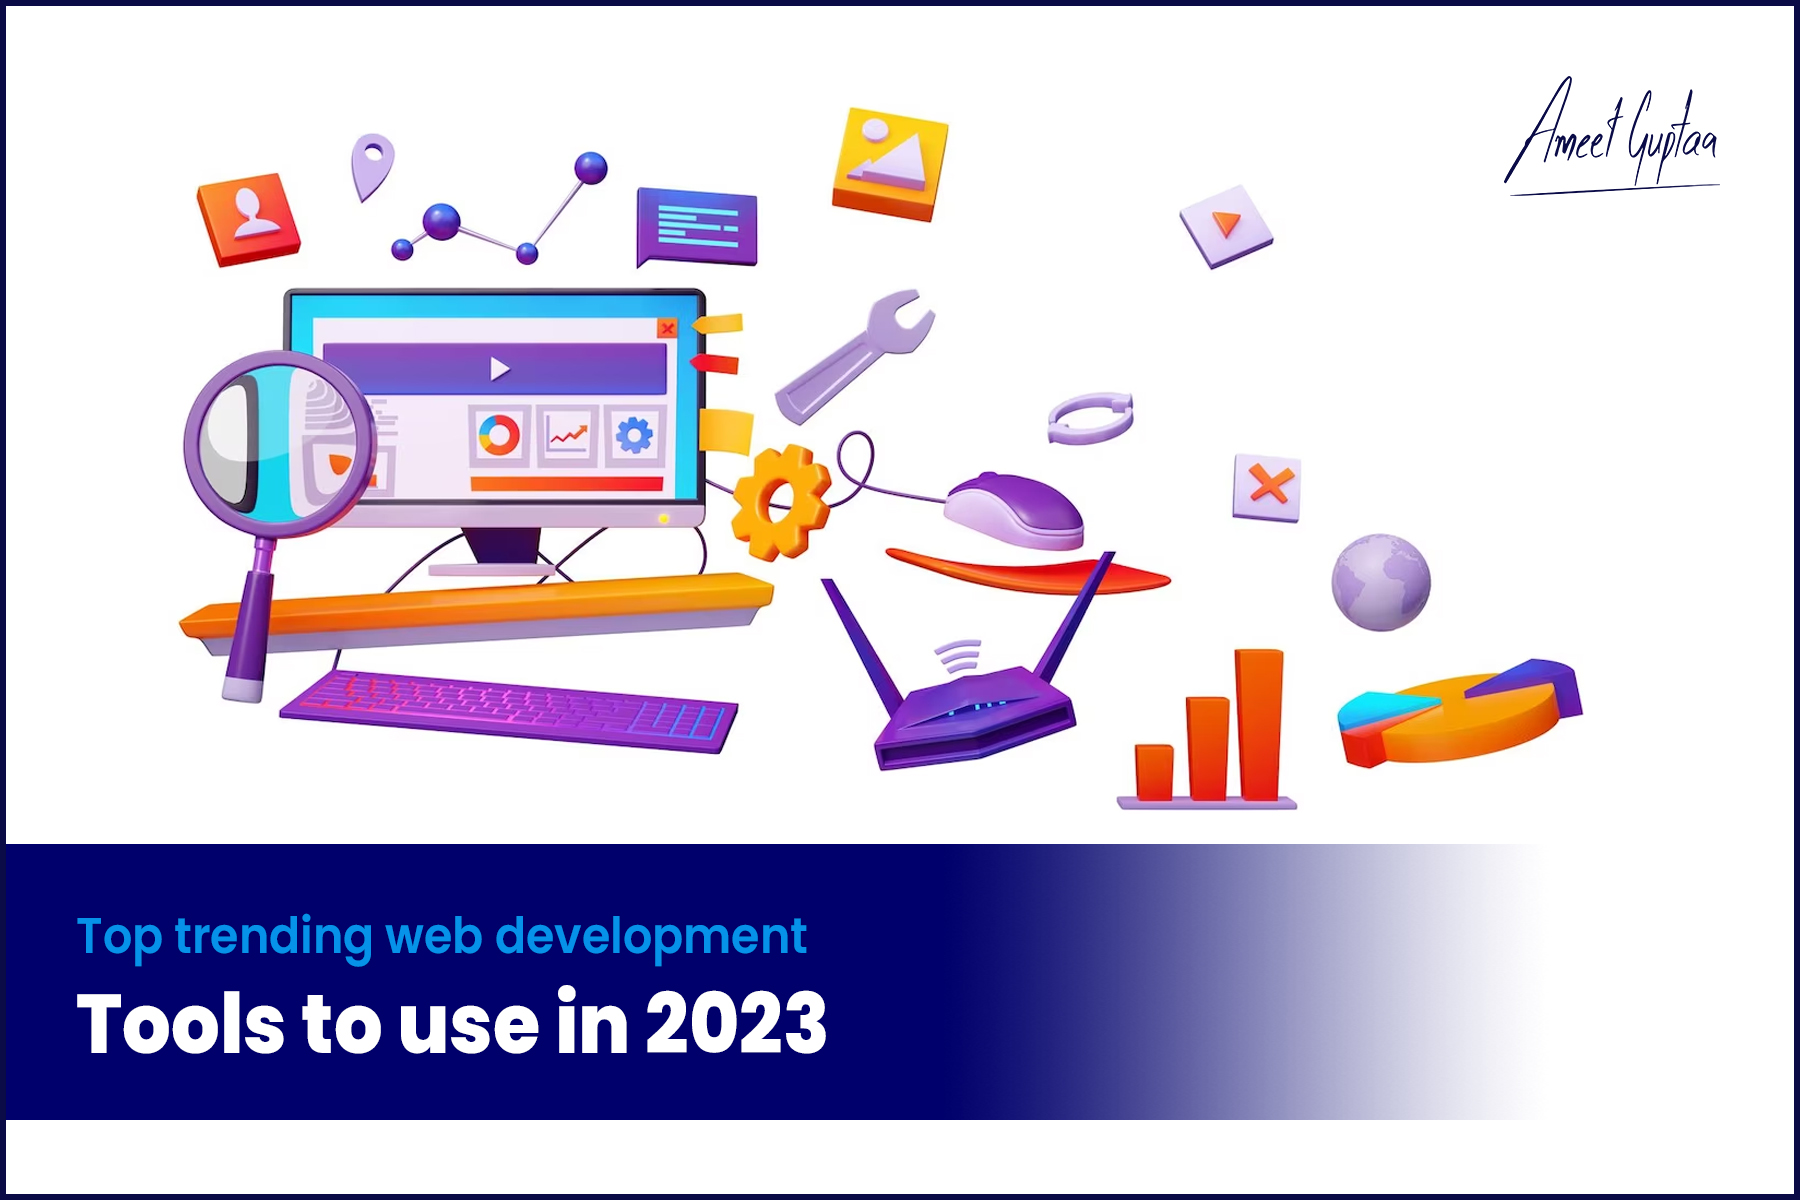 Top Trending Web Development Tools to Use in 2023